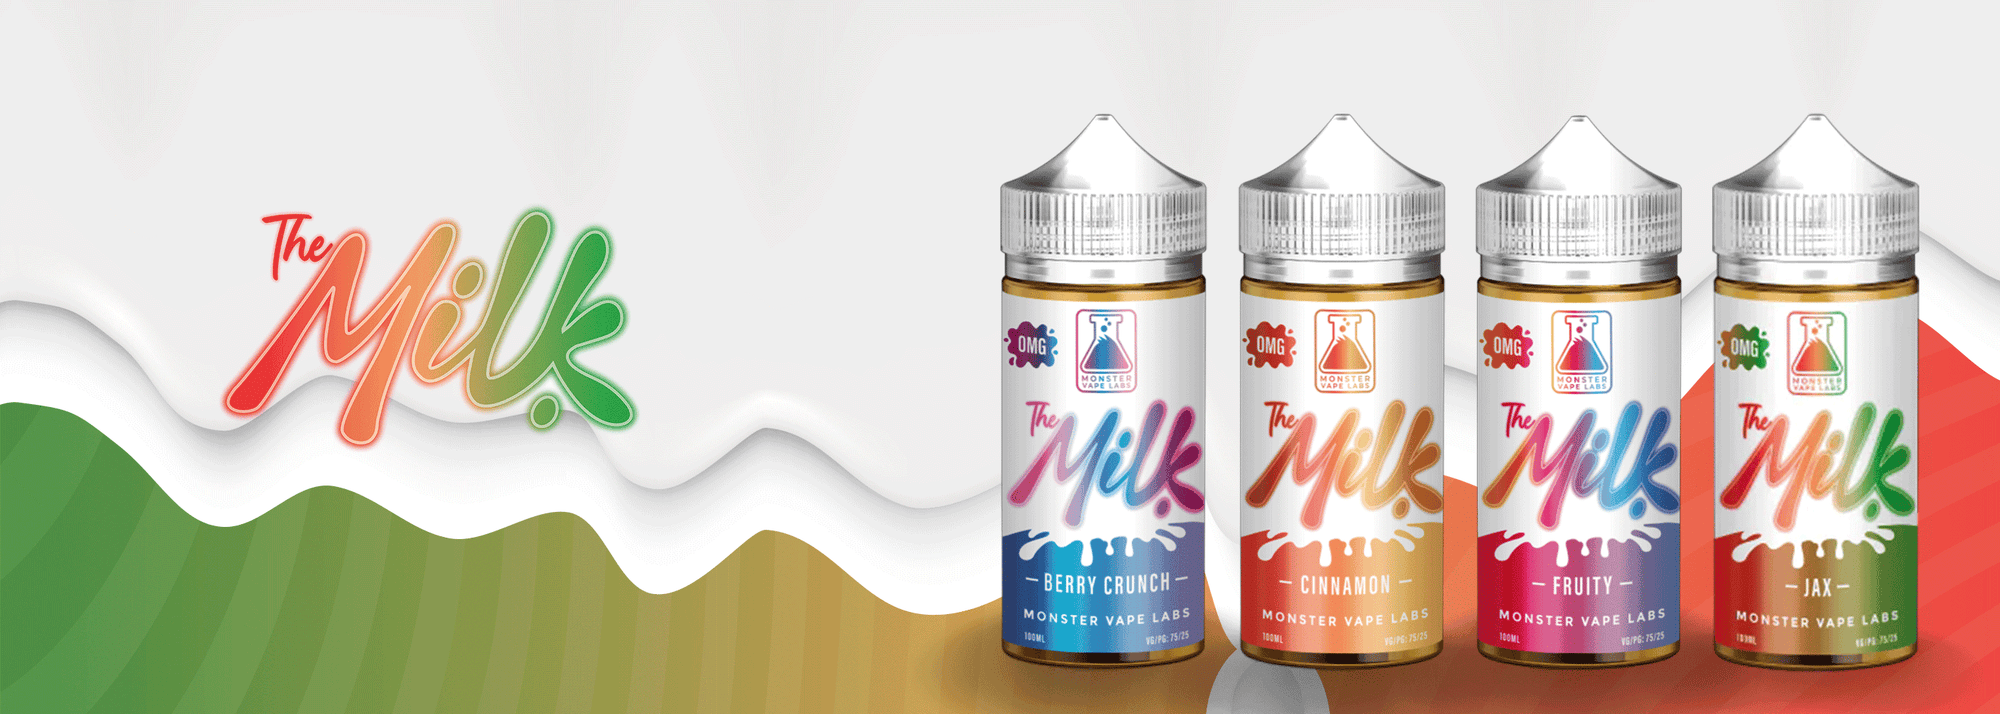 Buy The Milk By Monster Vape Labs - Wick and Wire Co Melbourne Vape Shop, Victoria Australia